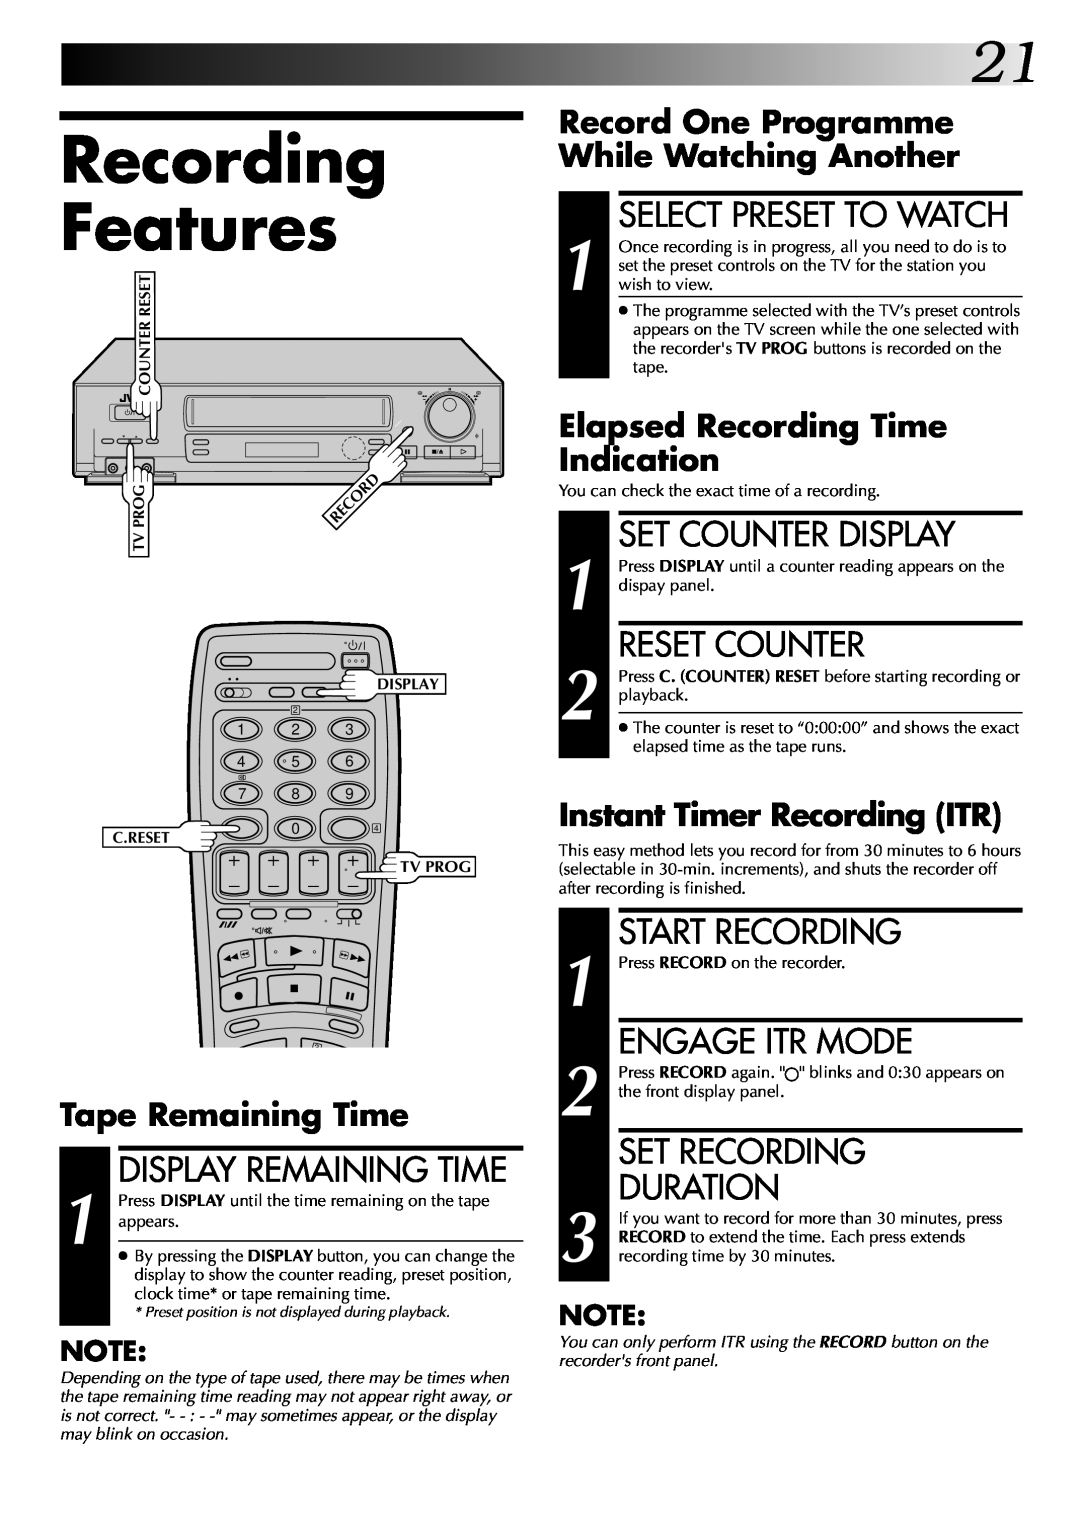 JVC HR-DD845EK setup guide Recording Features, Select Preset To Watch, Set Counter Display, Reset Counter, Engage Itr Mode 